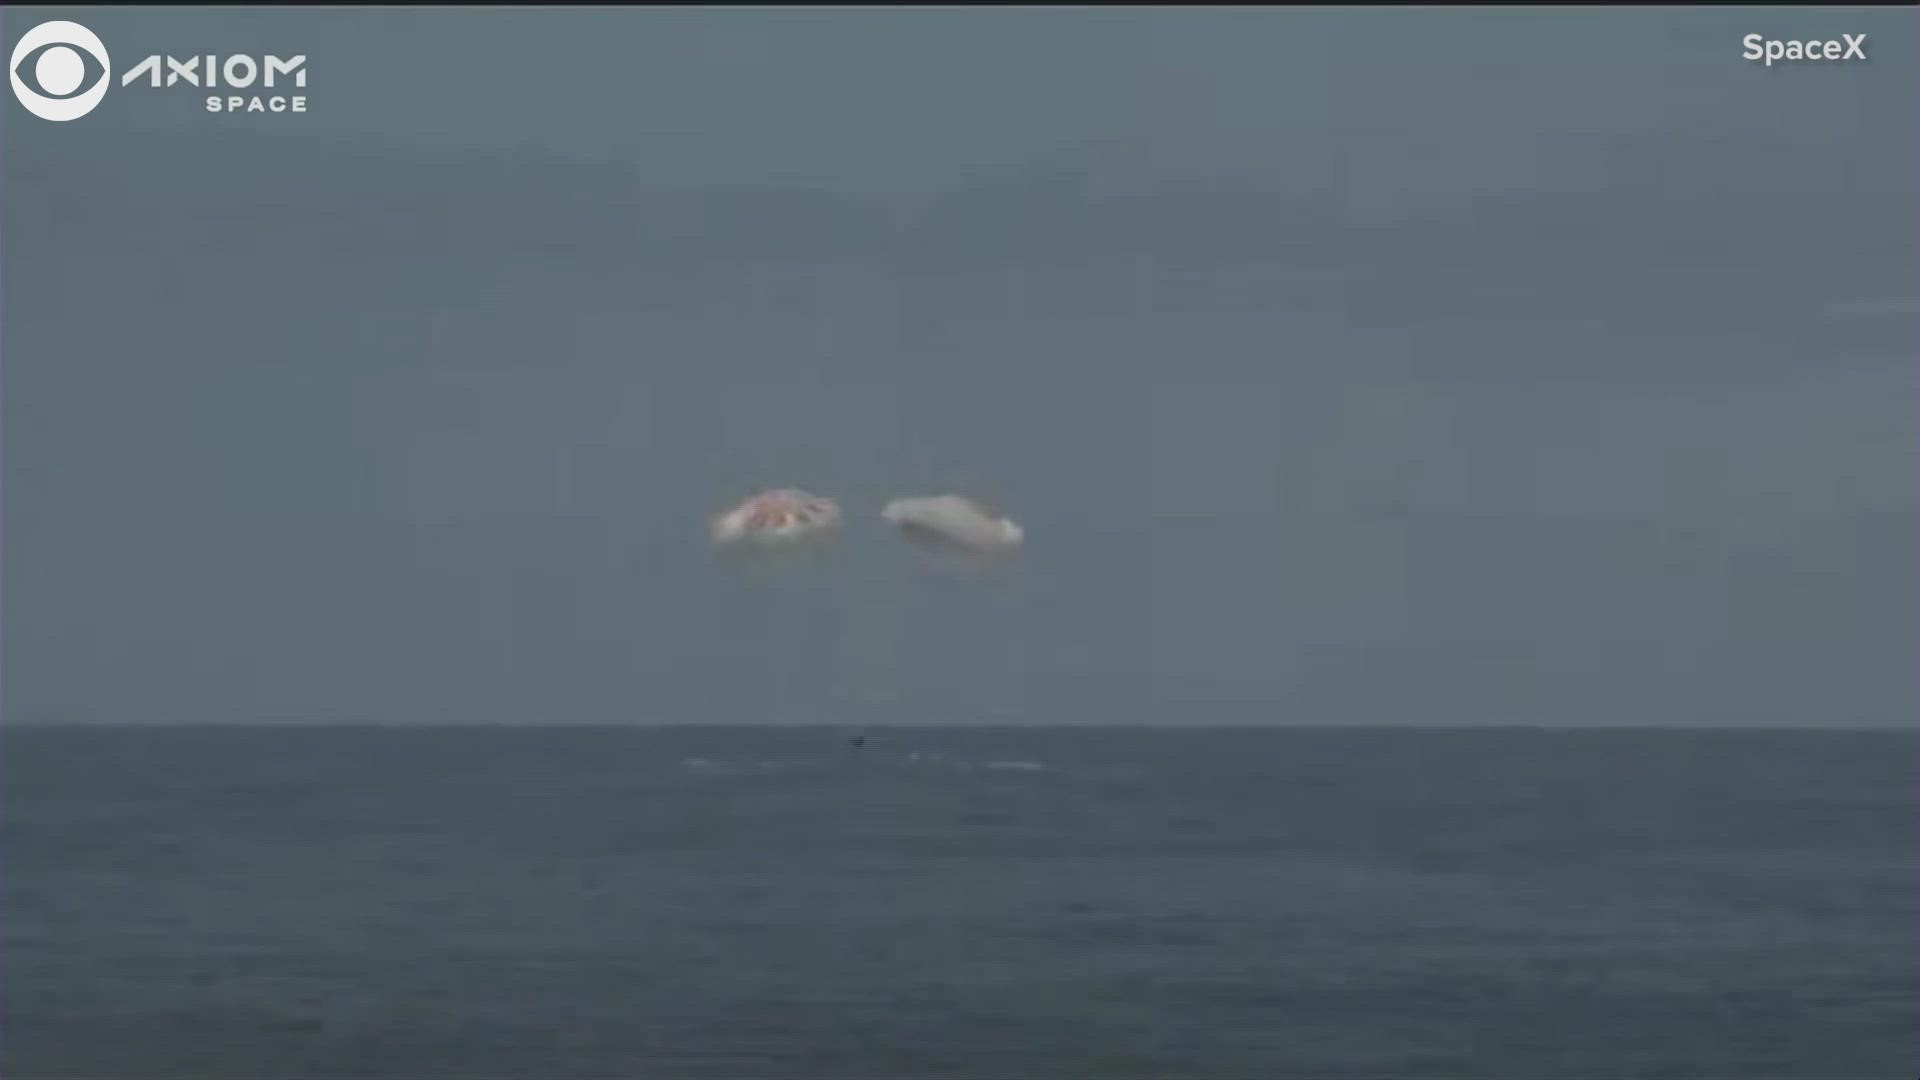 The first fully commercial, non-government crew to visit the International Space Station splashed down back on Earth inside the SpaceX Crew Dragon capsule.